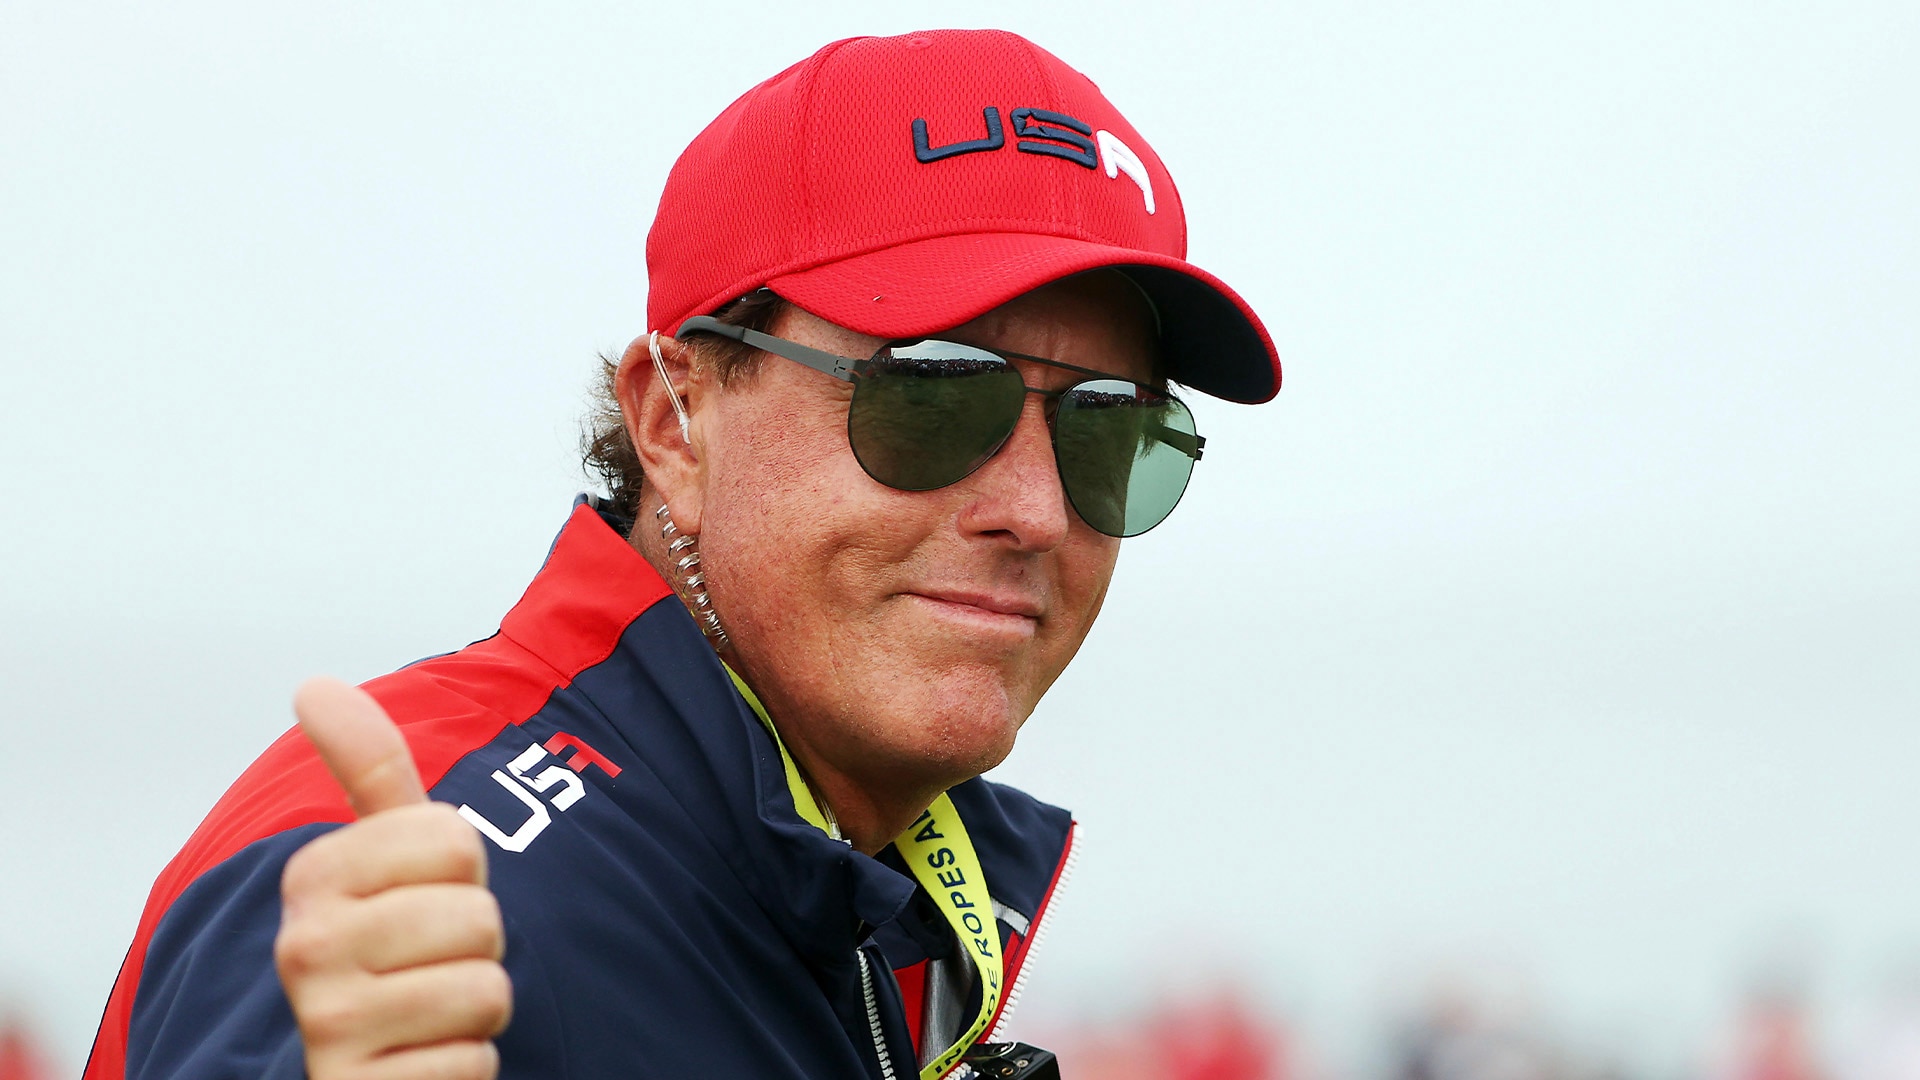 Phil Mickelson’s assistant captain experience at Ryder Cup could be beneficial moving forward